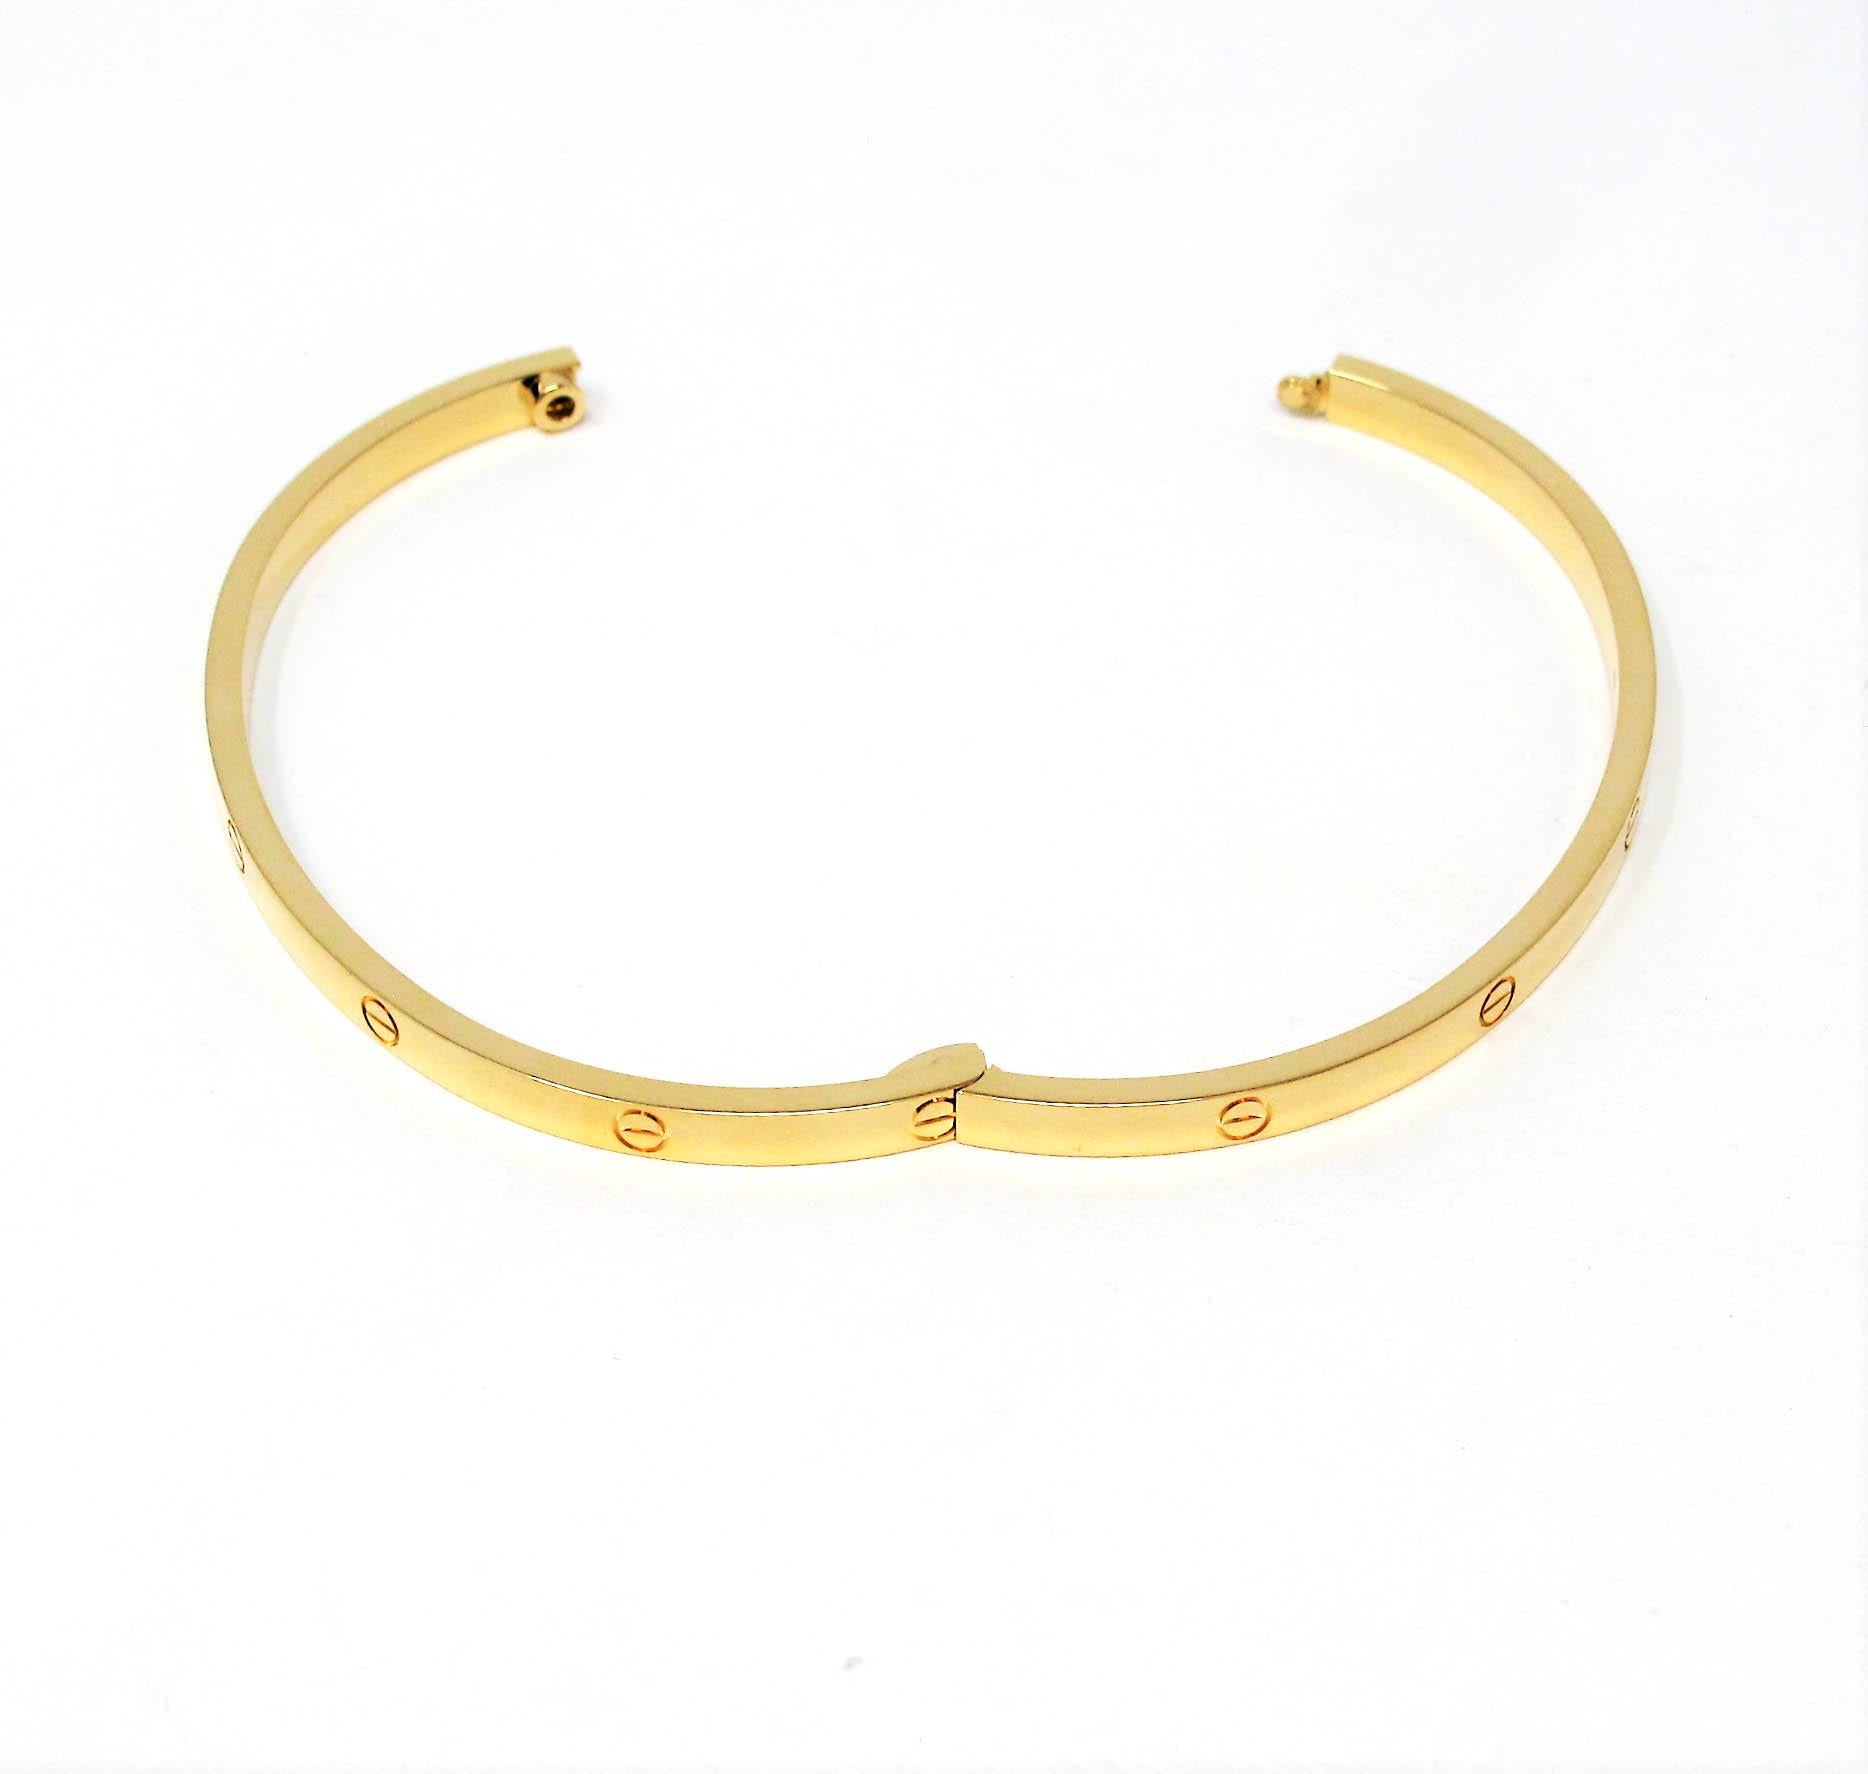 Cartier Love Collection Small 18 Karat Yellow Gold Bangle Bracelet with Box 1